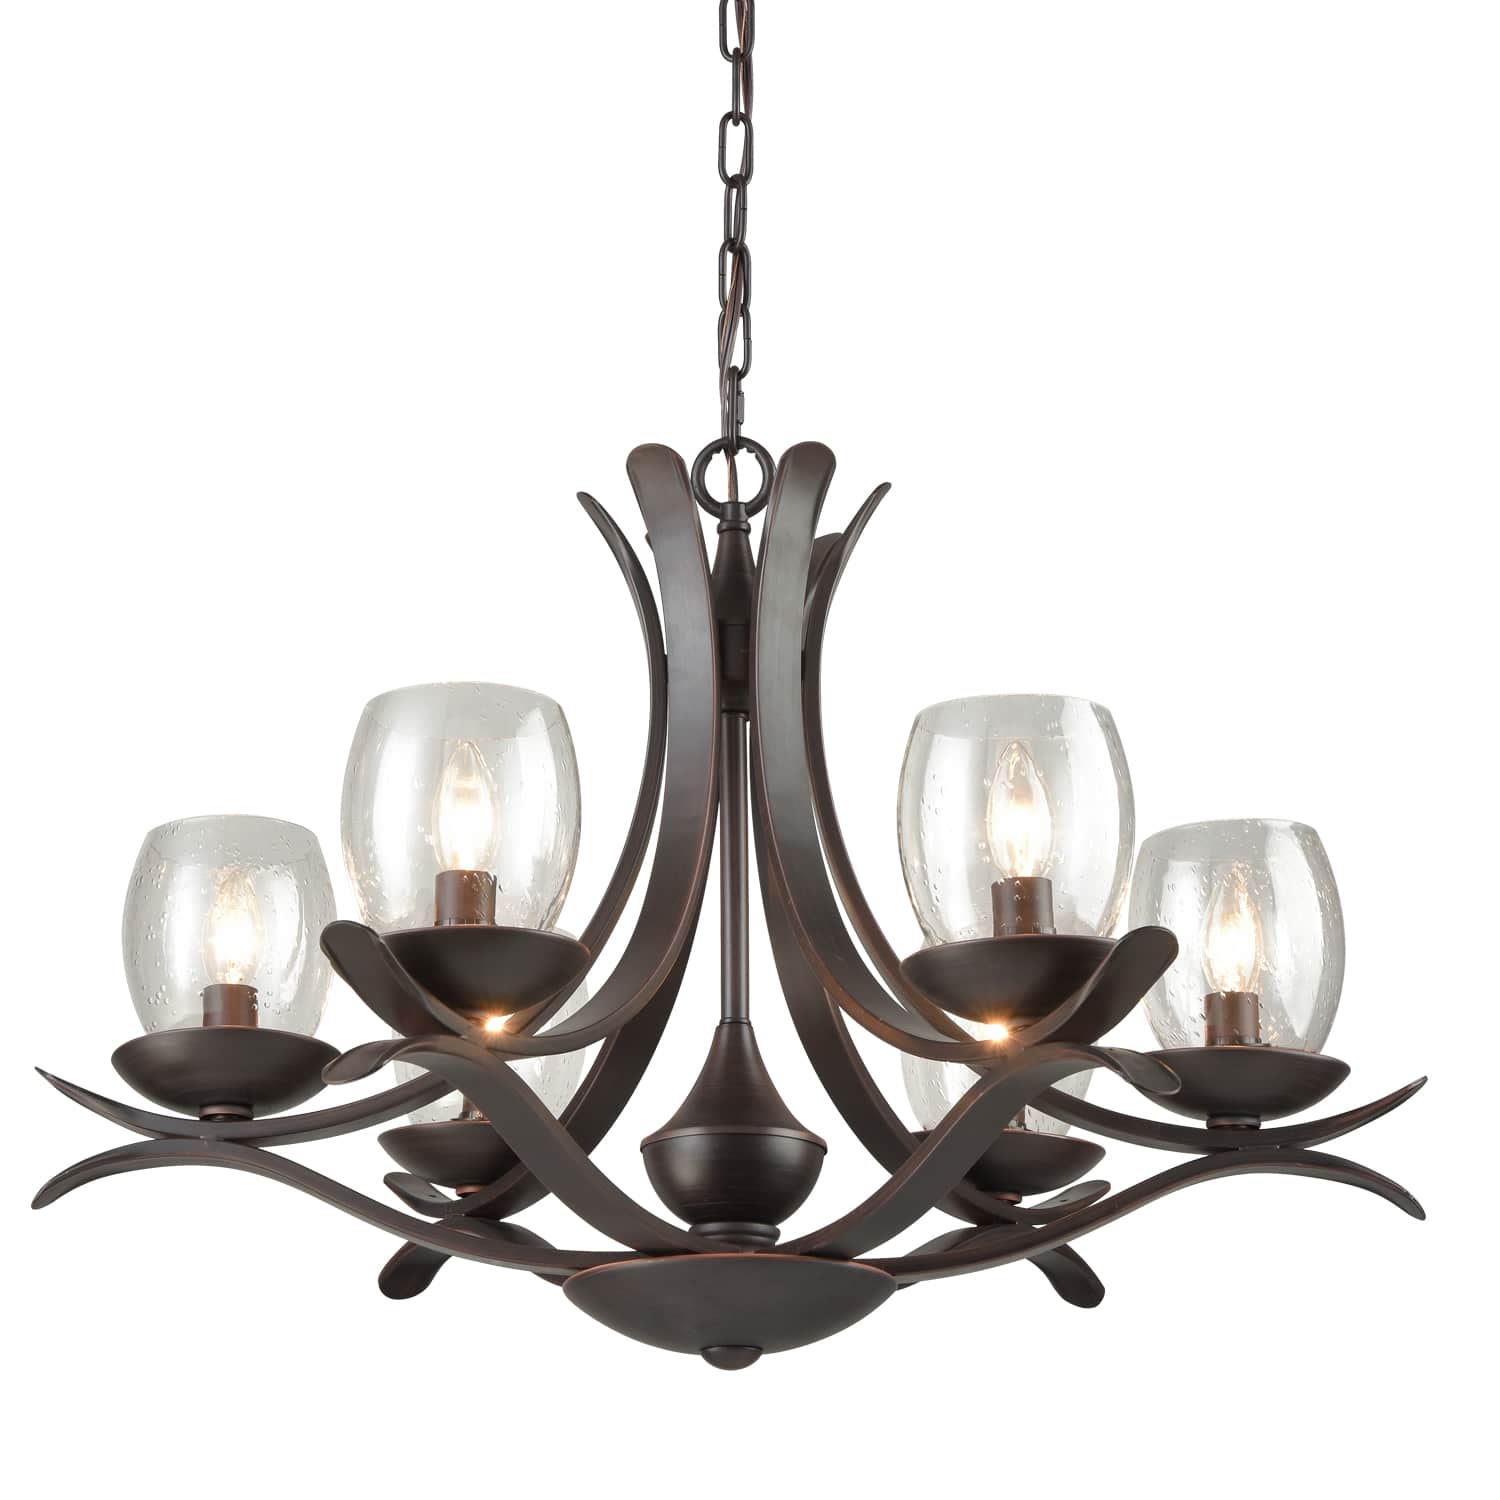 Rustic Bronze Dining Room Chandelier with Seeded Glass - 6 Light